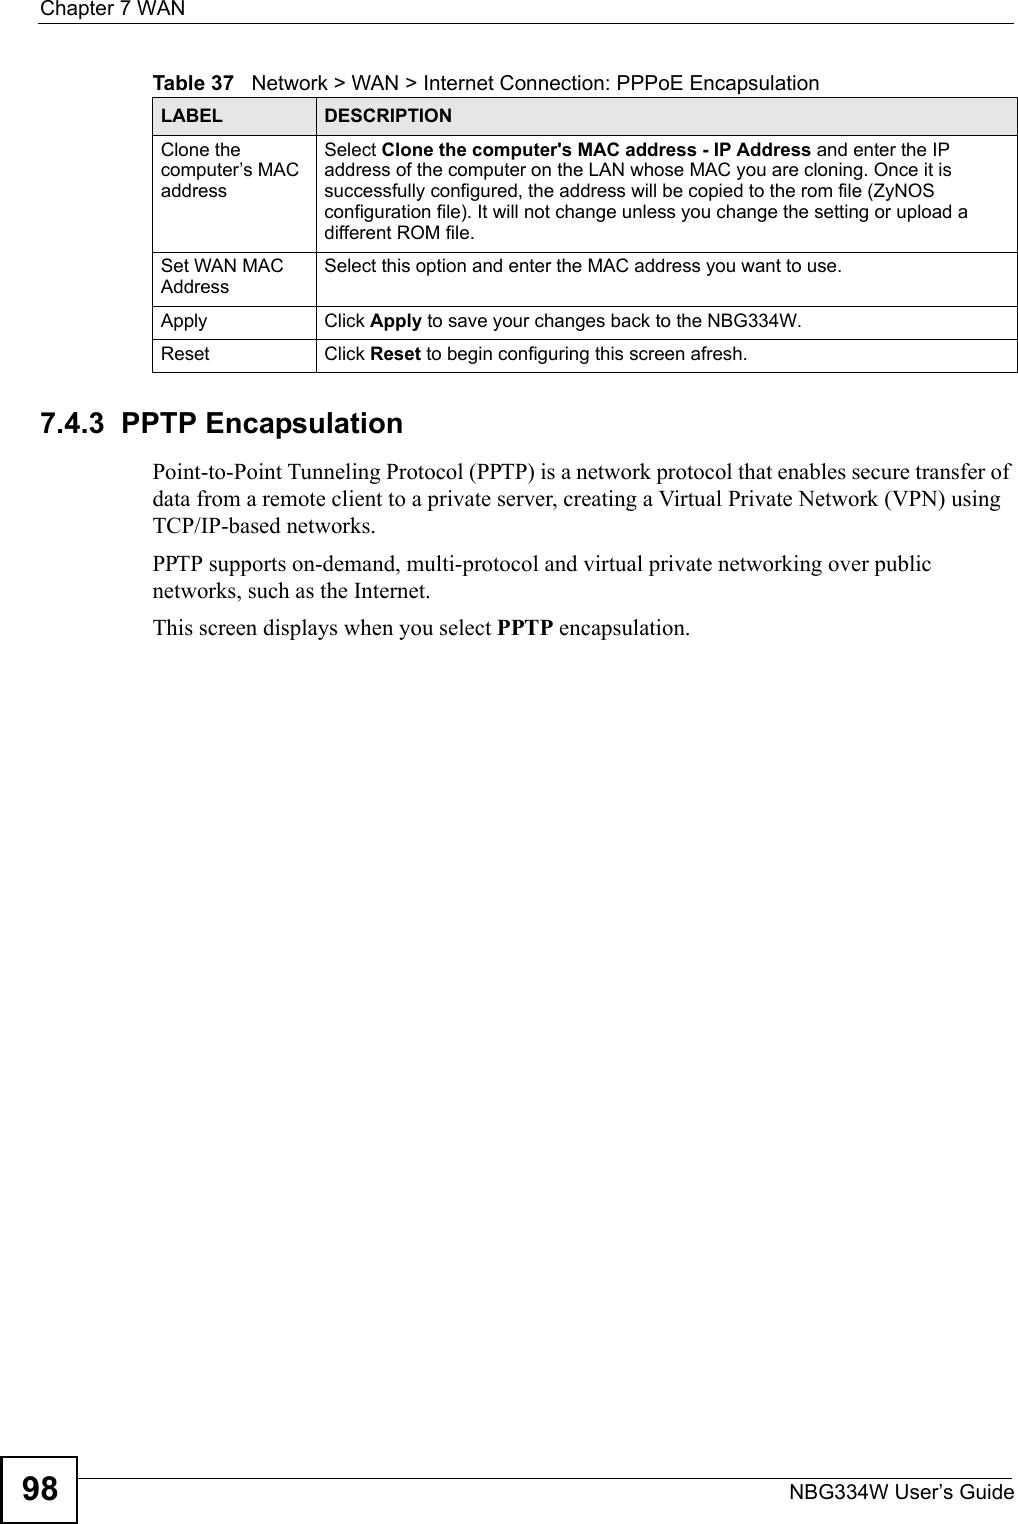 Chapter 7 WANNBG334W User’s Guide987.4.3  PPTP EncapsulationPoint-to-Point Tunneling Protocol (PPTP) is a network protocol that enables secure transfer of data from a remote client to a private server, creating a Virtual Private Network (VPN) using TCP/IP-based networks.PPTP supports on-demand, multi-protocol and virtual private networking over public networks, such as the Internet.This screen displays when you select PPTP encapsulation.Clone the computer’s MAC addressSelect Clone the computer&apos;s MAC address - IP Address and enter the IP address of the computer on the LAN whose MAC you are cloning. Once it is successfully configured, the address will be copied to the rom file (ZyNOS configuration file). It will not change unless you change the setting or upload a different ROM file. Set WAN MAC AddressSelect this option and enter the MAC address you want to use.Apply Click Apply to save your changes back to the NBG334W.Reset Click Reset to begin configuring this screen afresh.Table 37   Network &gt; WAN &gt; Internet Connection: PPPoE EncapsulationLABEL DESCRIPTION